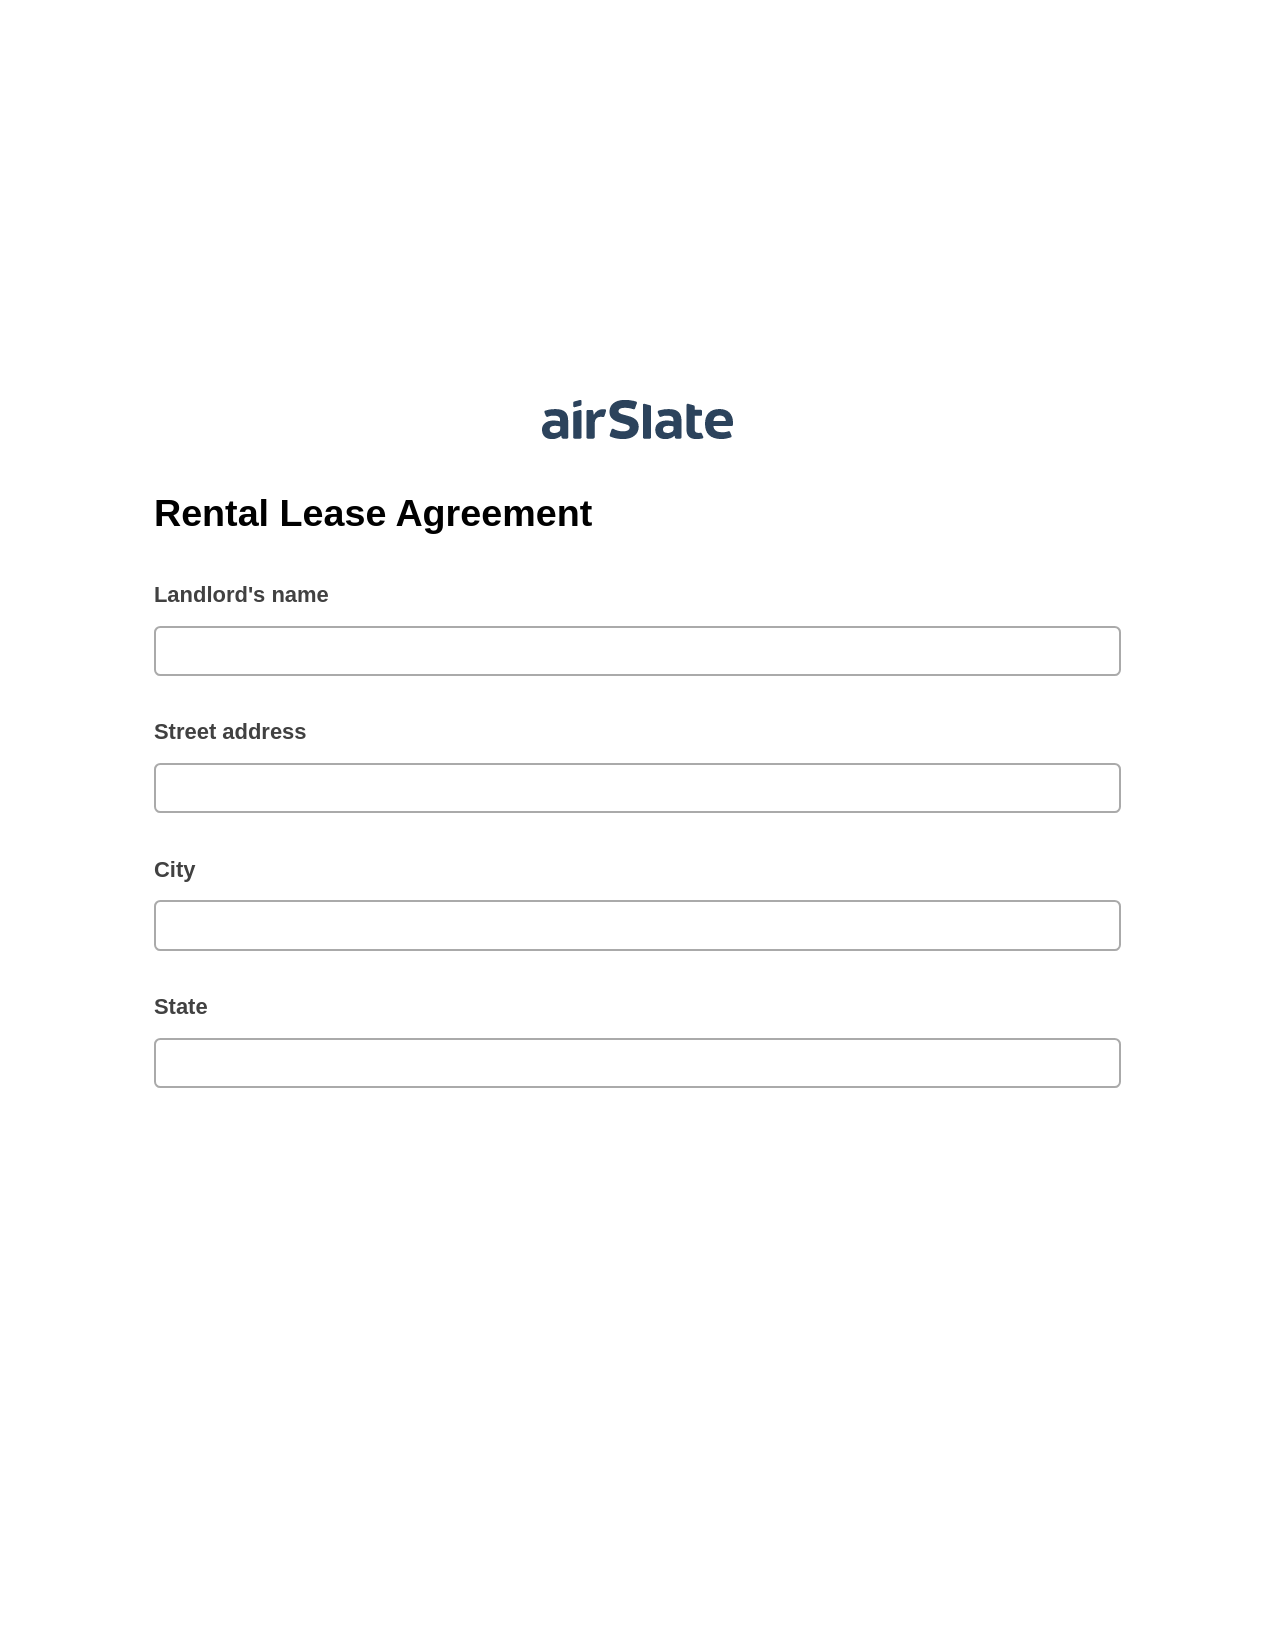 Multirole Rental Lease Agreement Pre-fill from NetSuite Records Bot, Mailchimp send Campaign bot, Export to NetSuite Record Bot